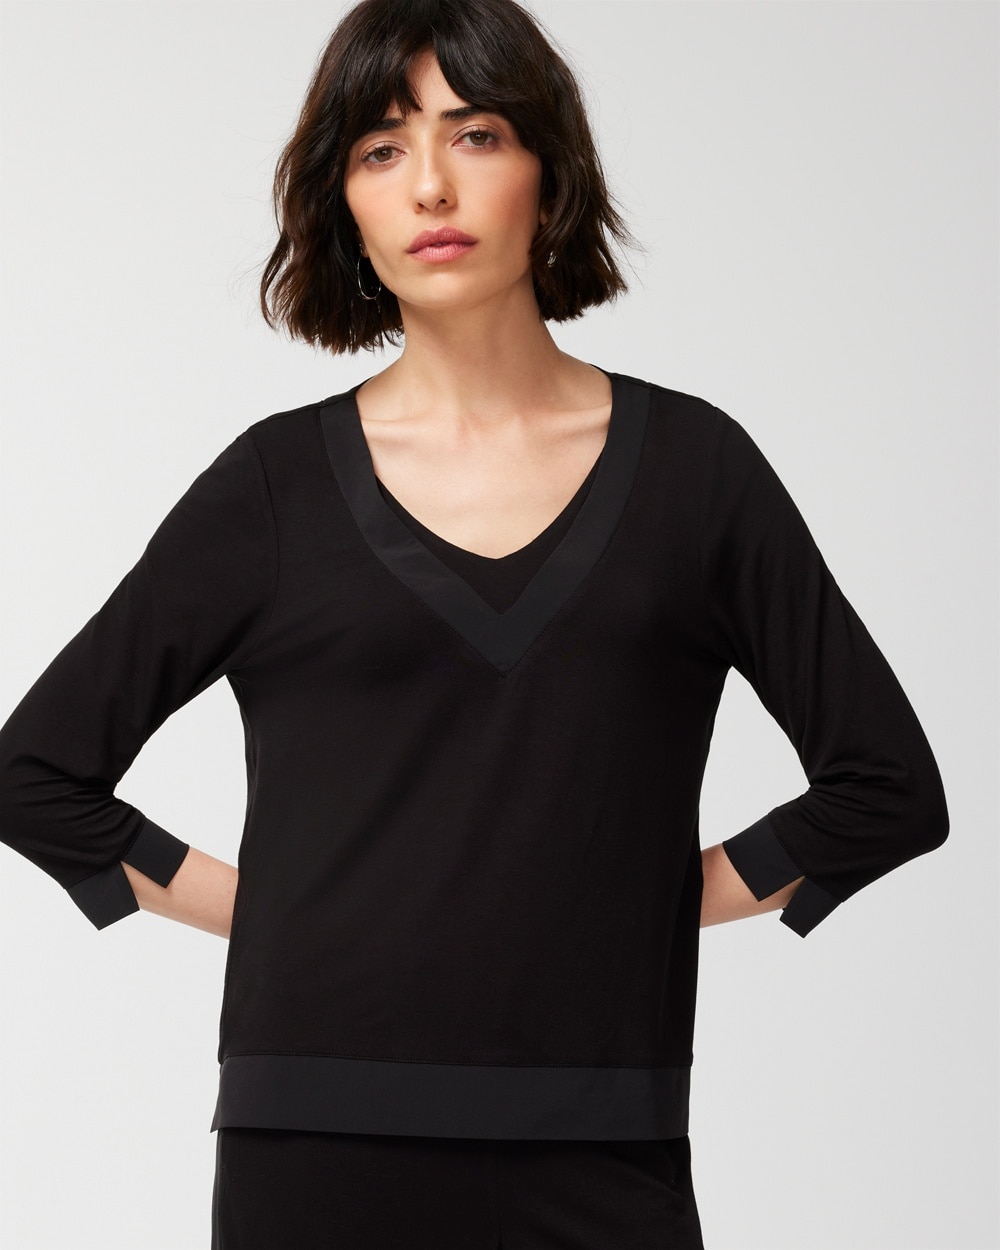 Weekends Bliss Balance Double-V Elbow-Sleeve Top